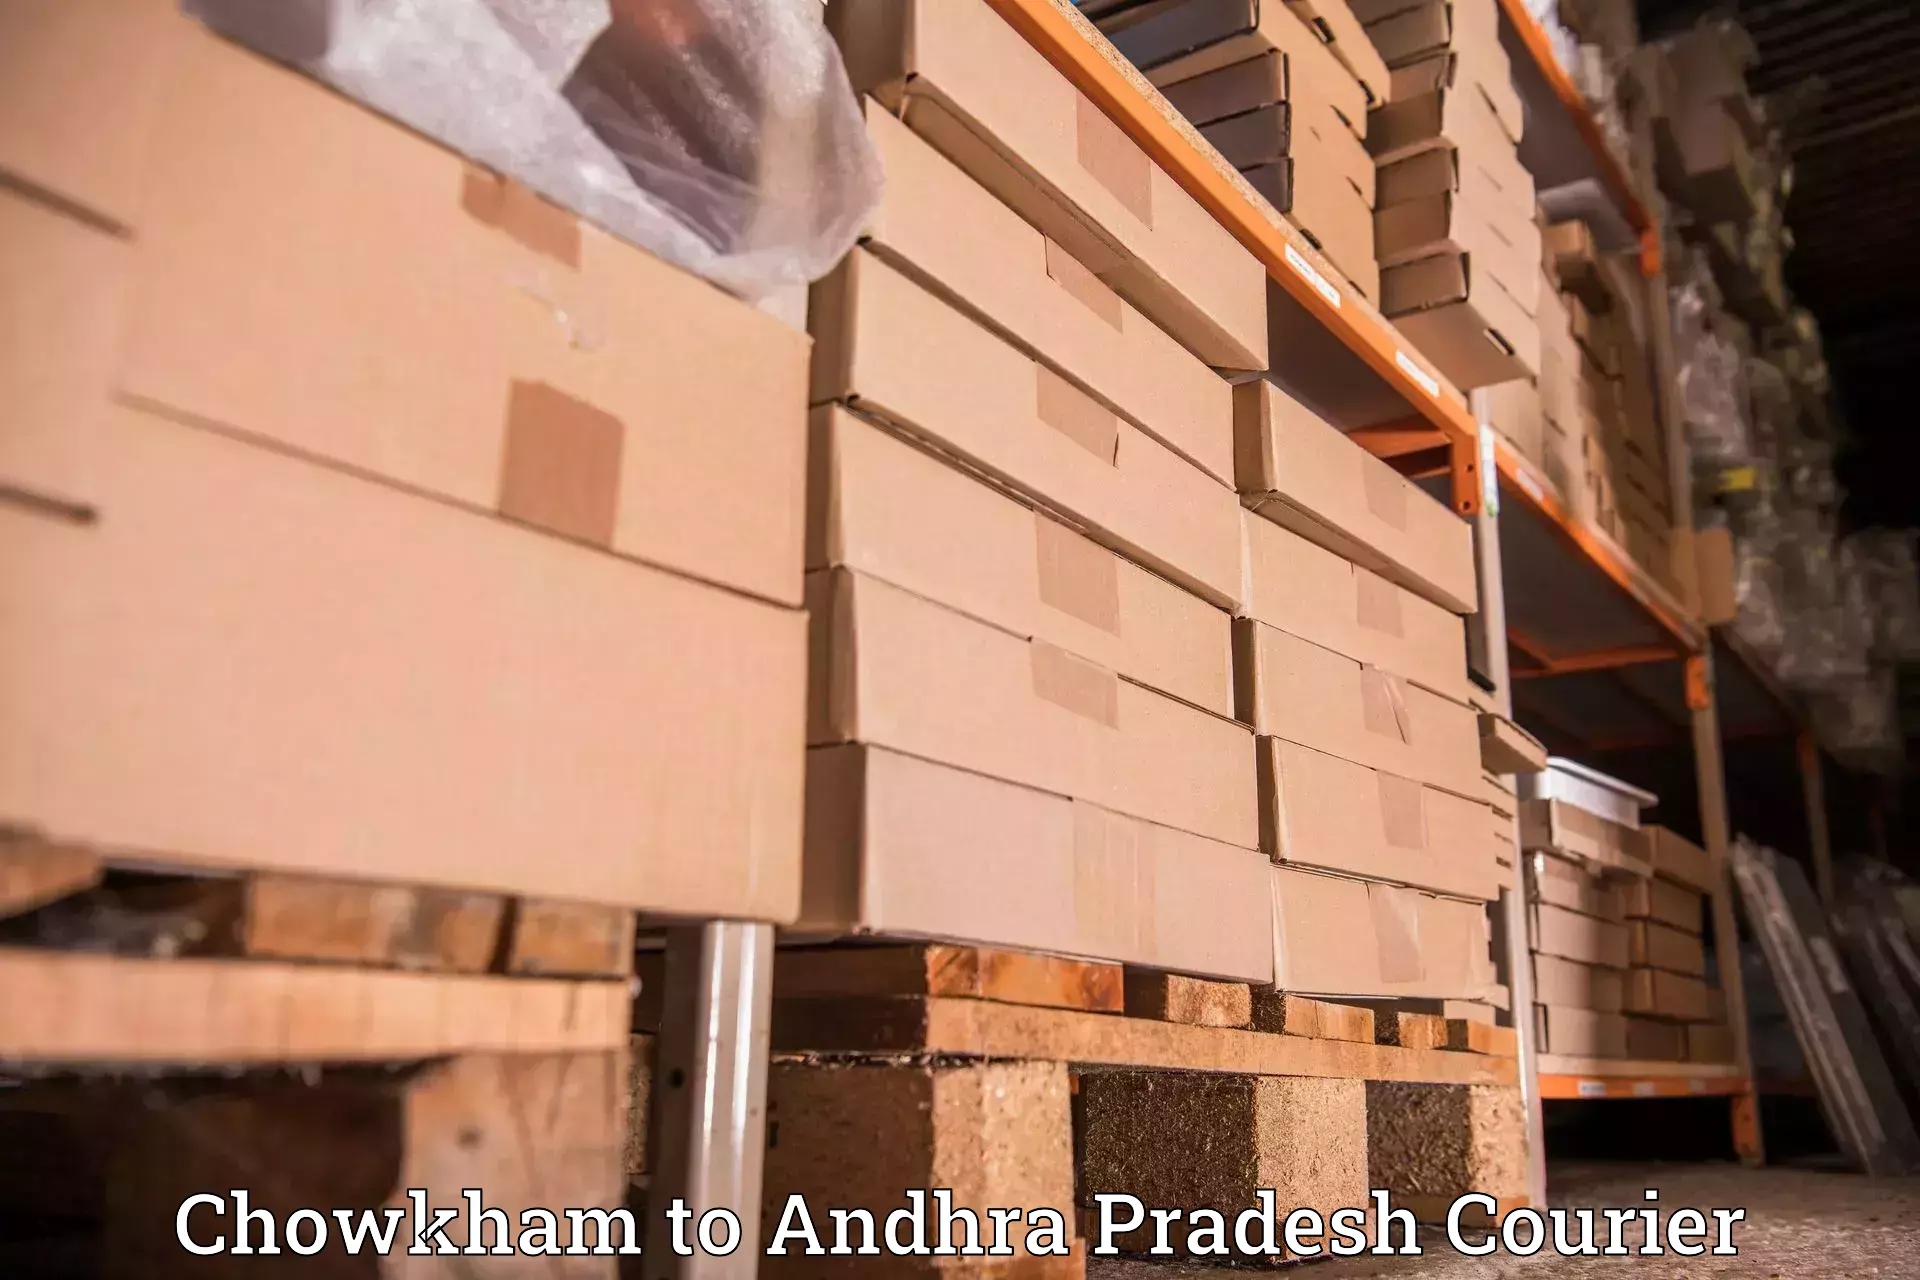 Courier service booking Chowkham to Visakhapatnam Port